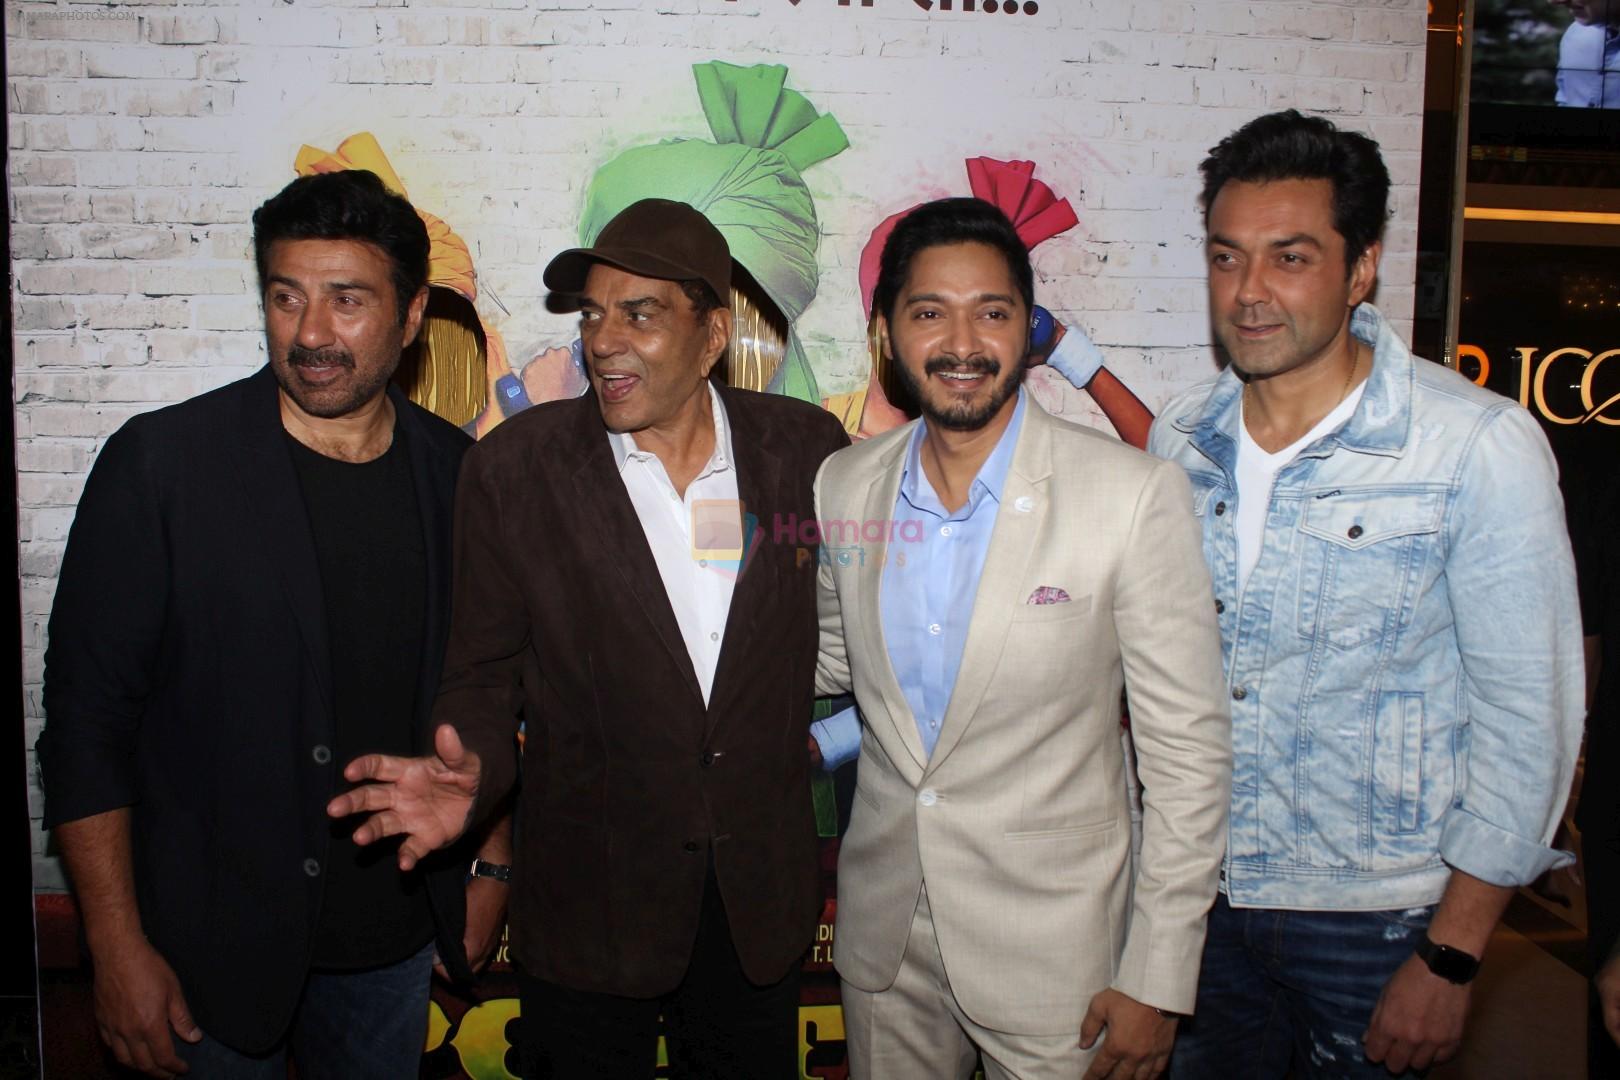 Dharmendra, Sunny Deol, Bobby Deol, Shreyas Talpade at the Trailer Launch Of Film Poster Boys on 24th July 2017